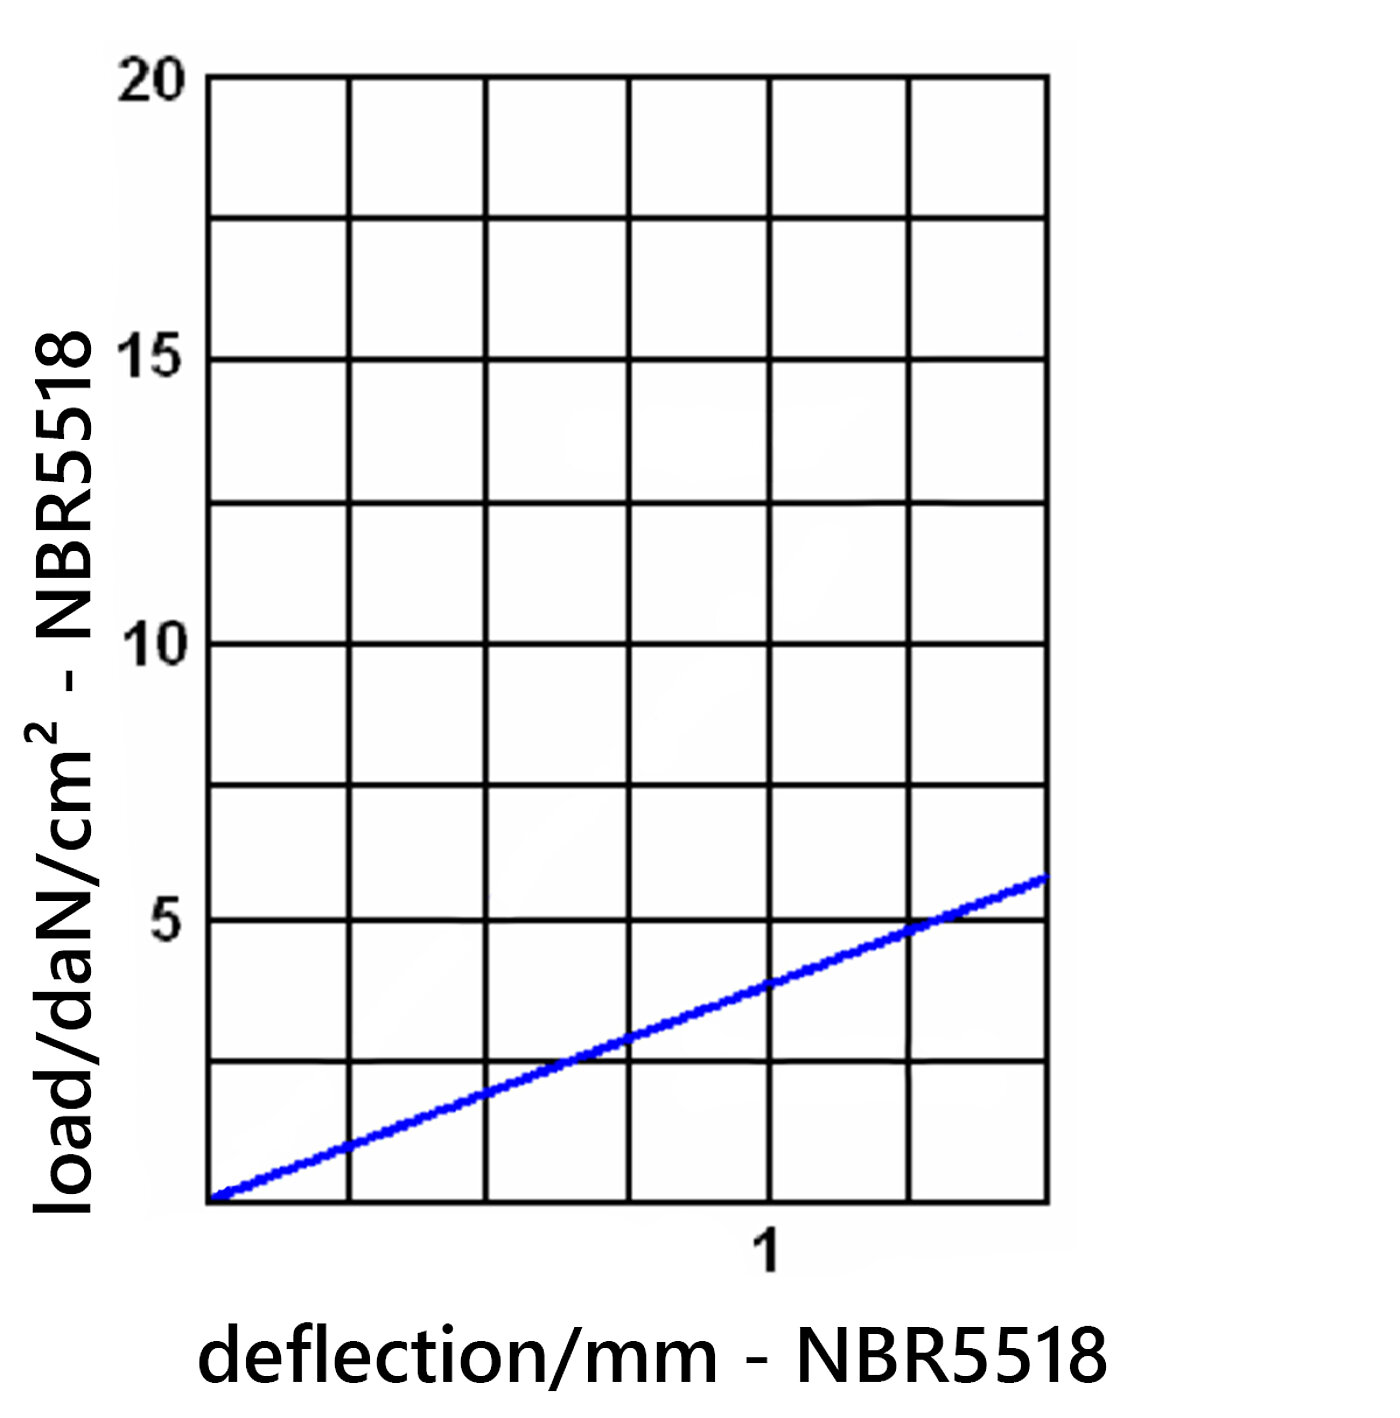 diagramme of the deflection of the elastomer board NBR5518 under load 